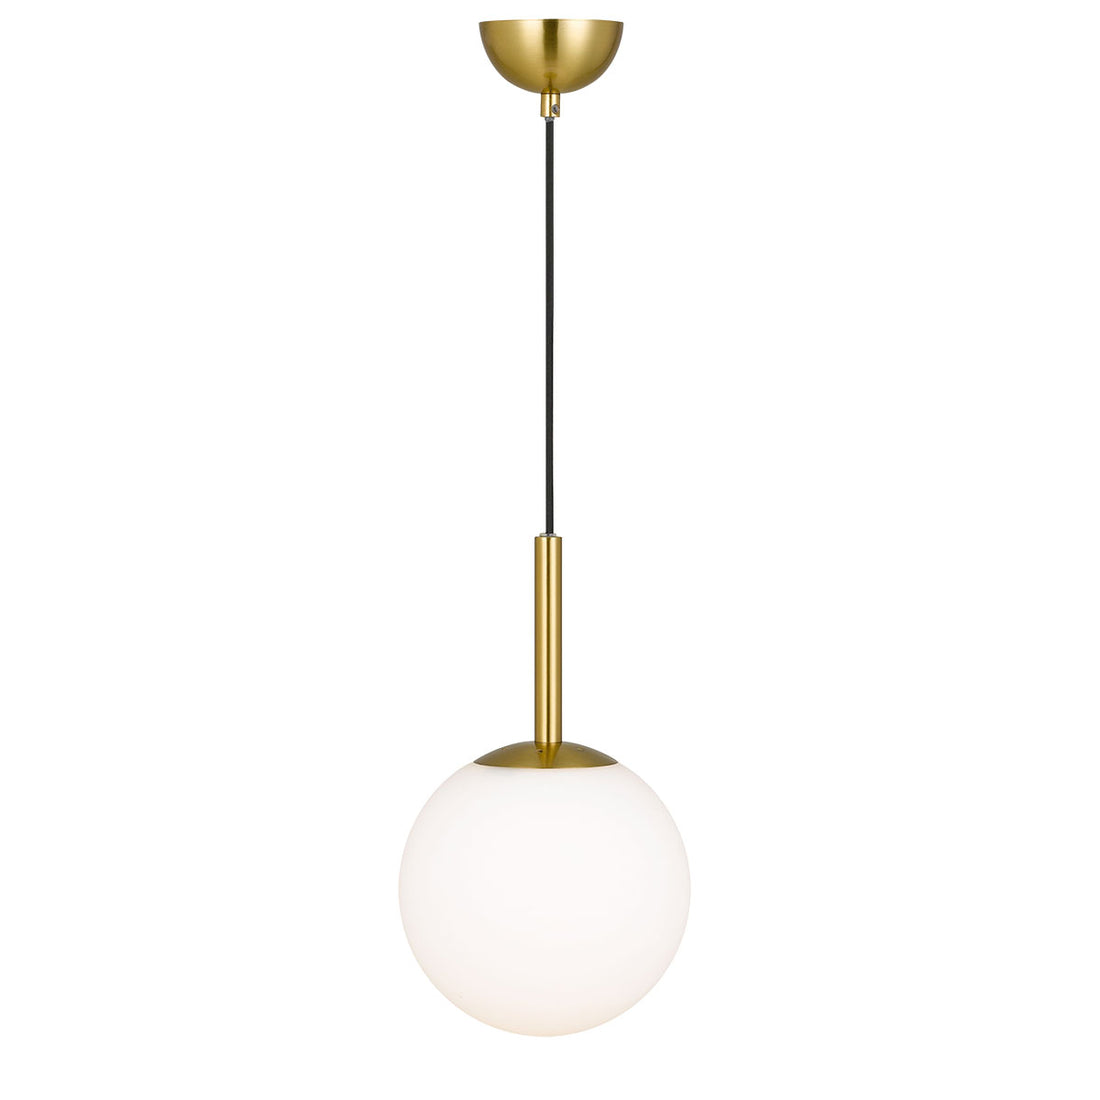 Bally 20cm Antique Gold with Opal Glass Modern Pendant